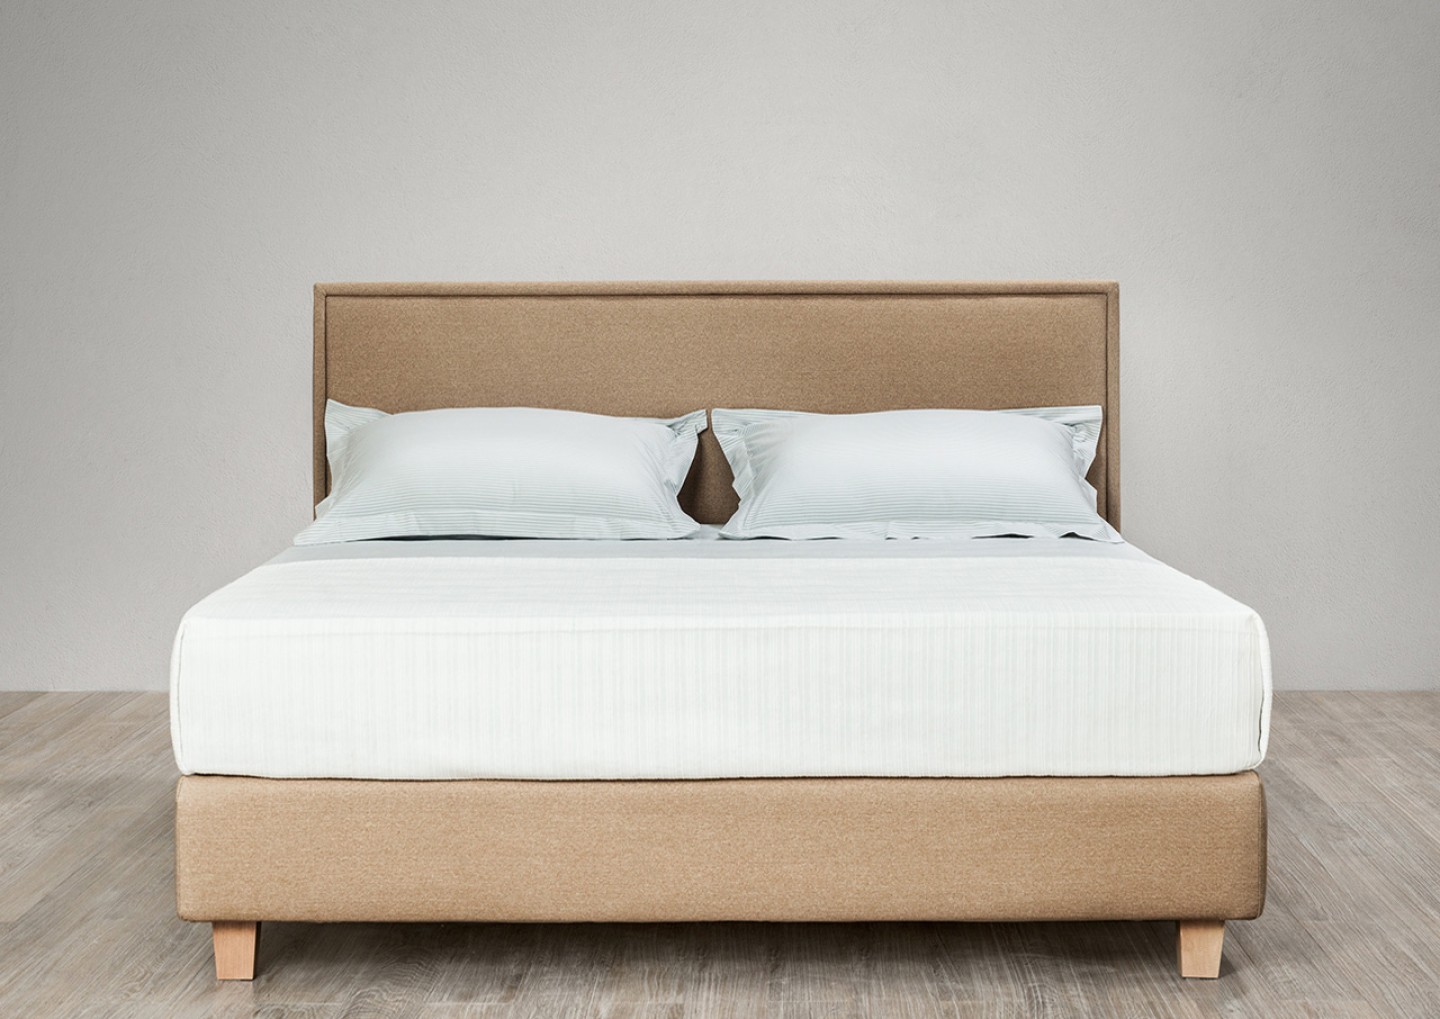 THE FLOW BED by Elite Strom